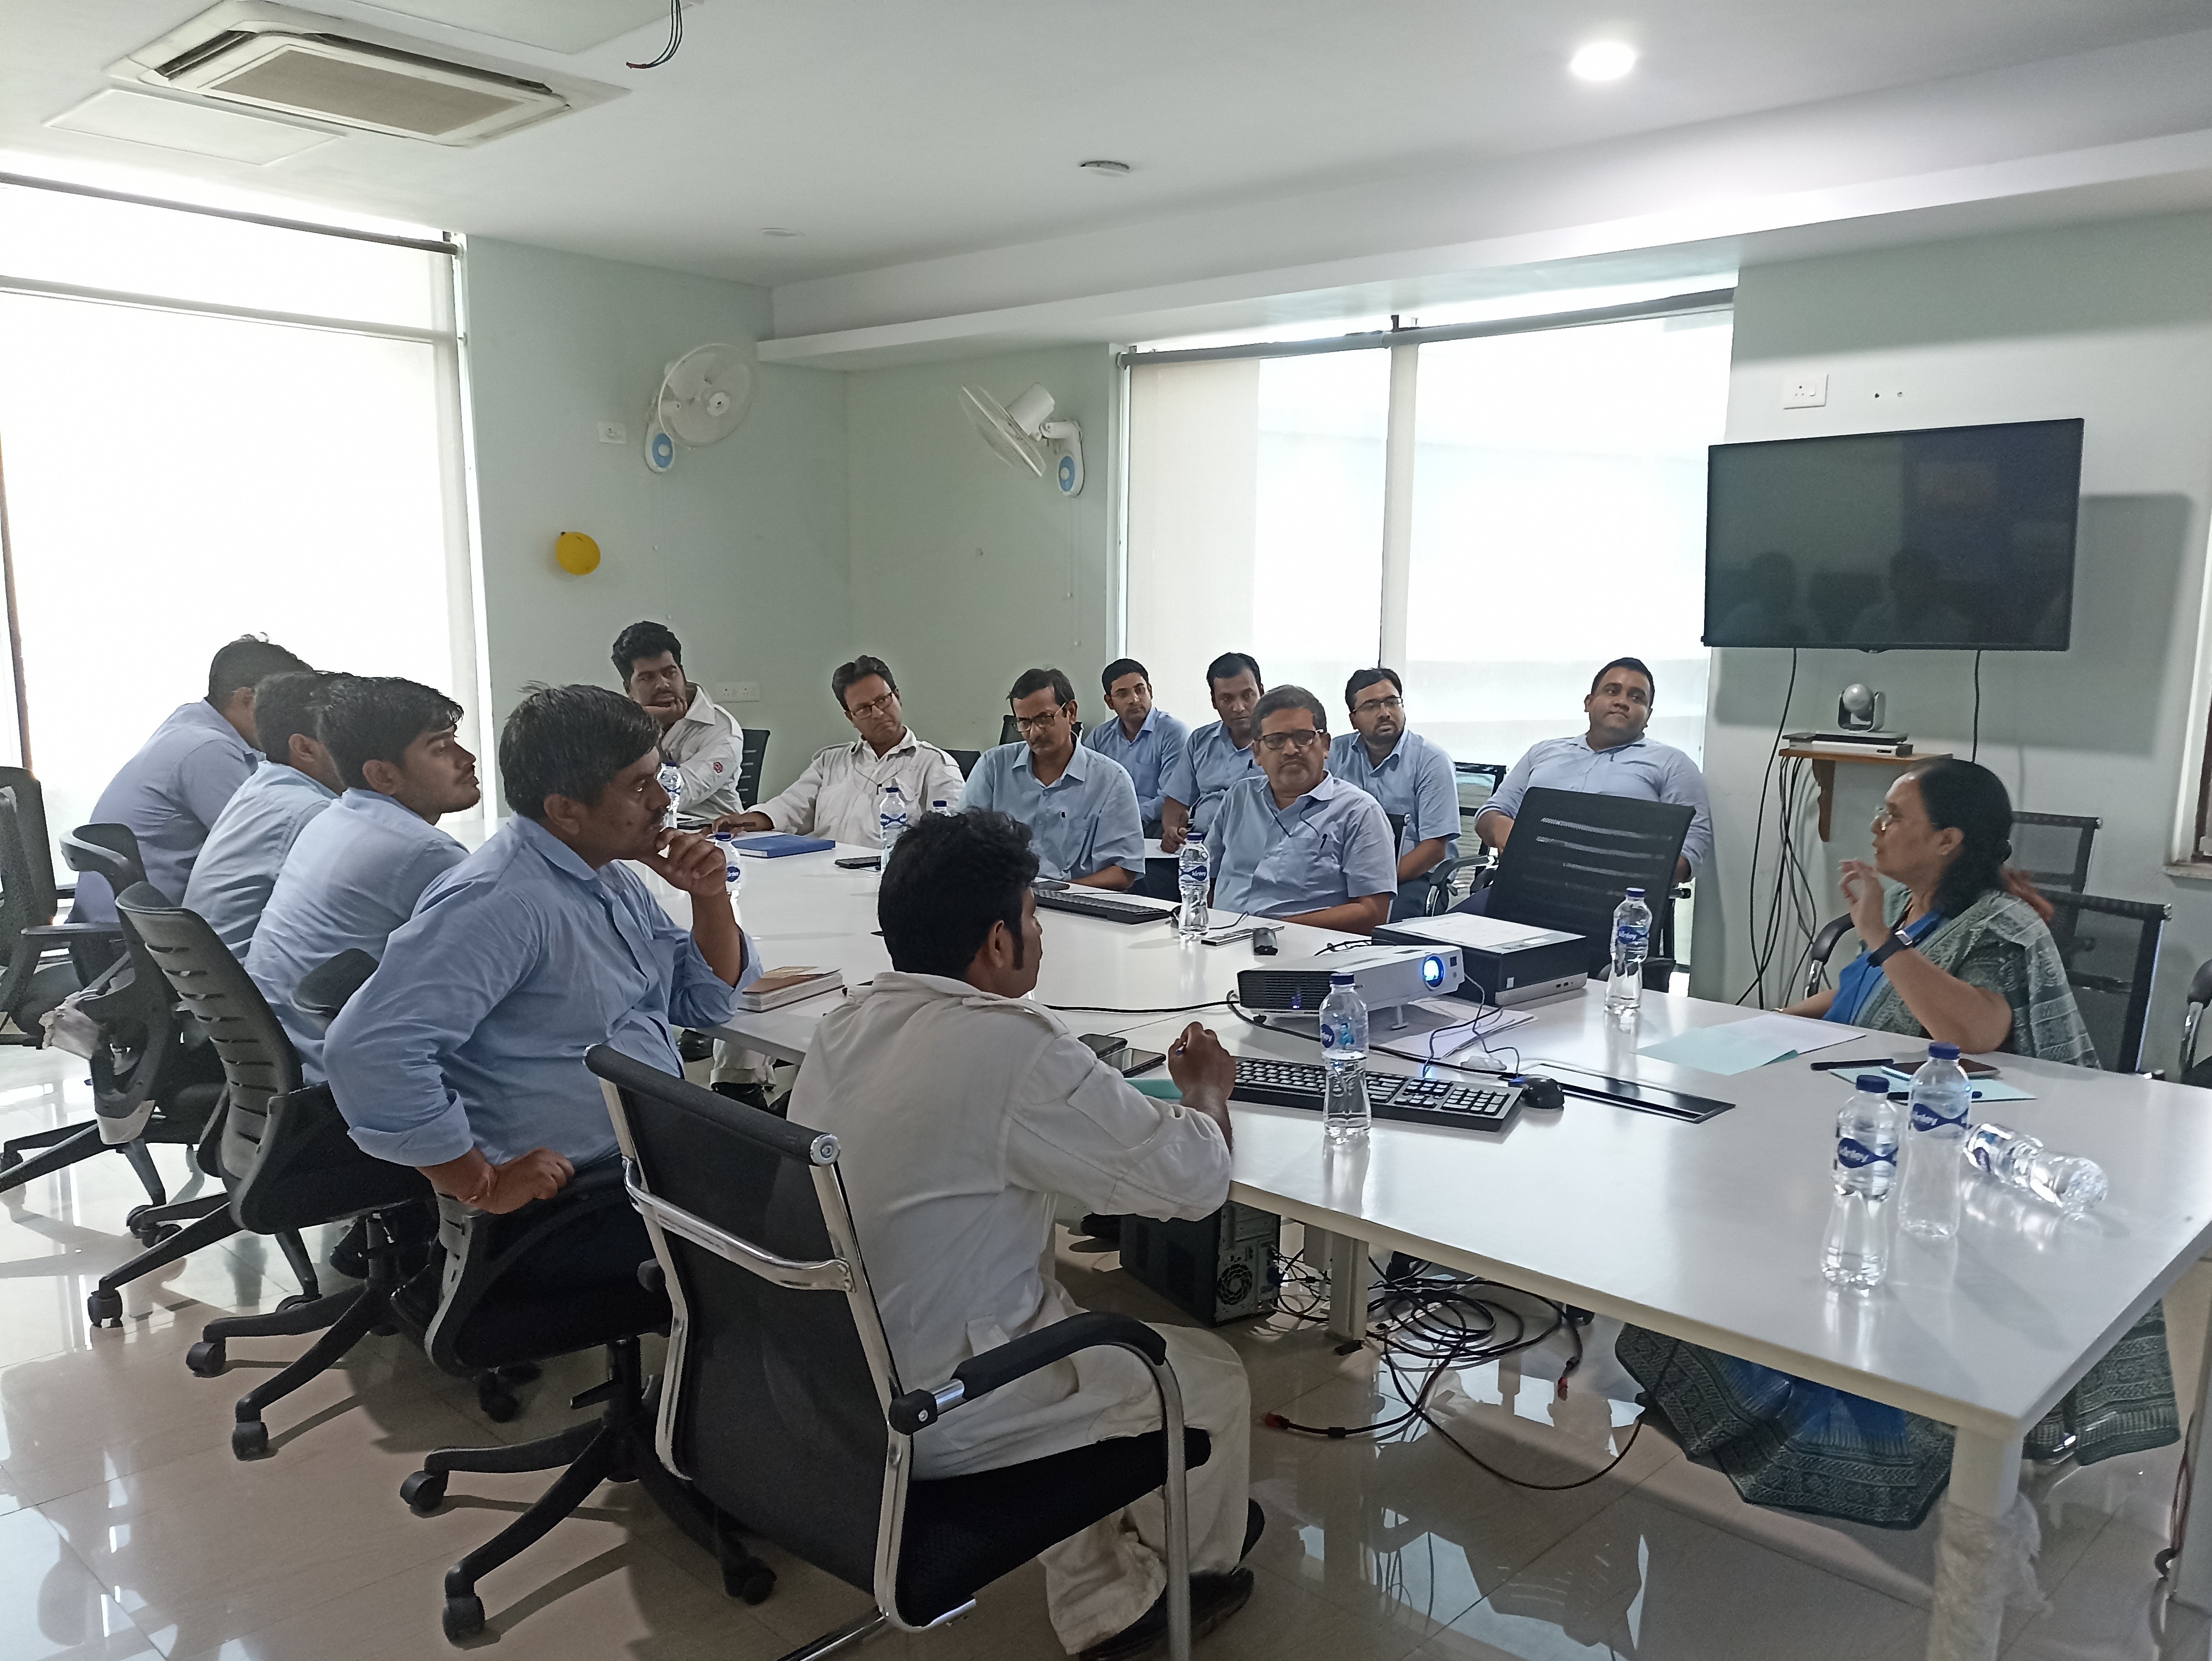 Awareness session on 'Contract Management in Shipbuilding Activities' for employees on 30 May 23